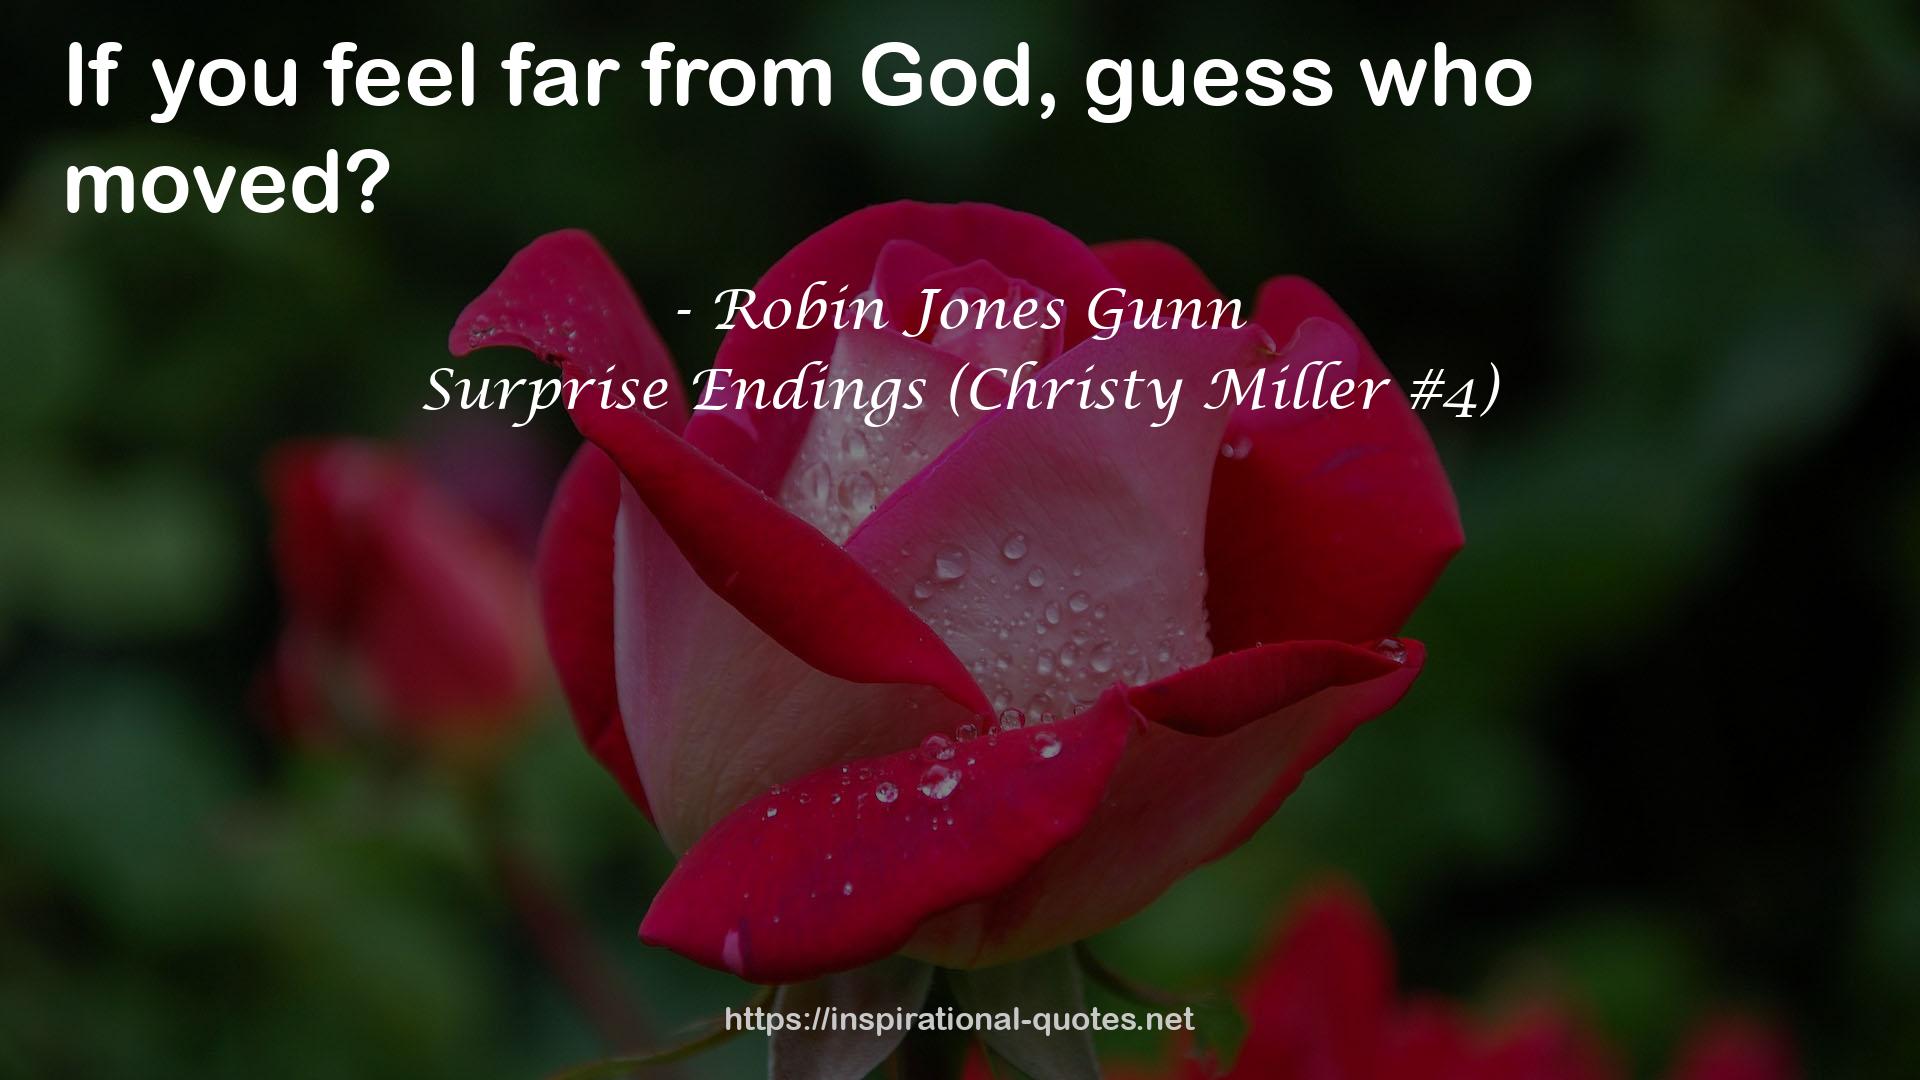 Surprise Endings (Christy Miller #4) QUOTES